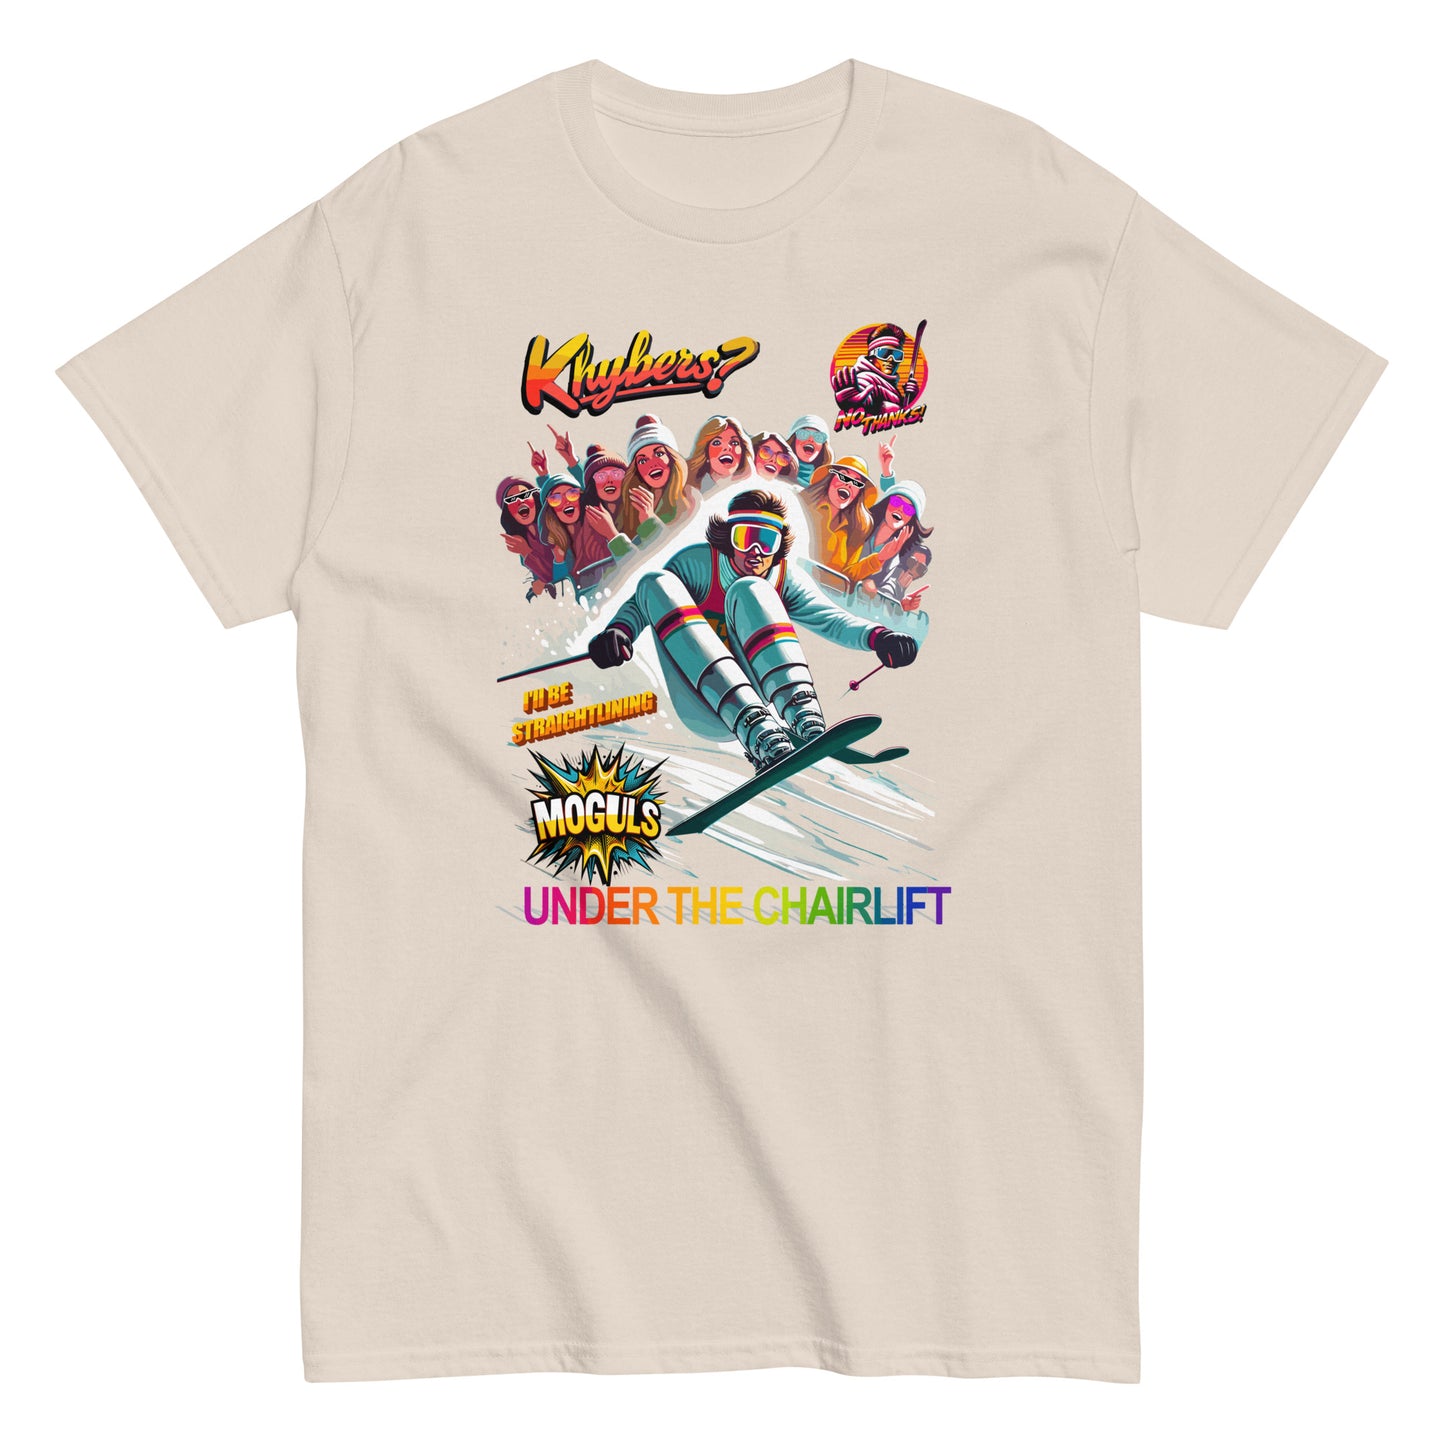 Khybers? No Thanks! Ill Be Straight Lining Under The Chairlift T-shirt printed by Whistler Shirts